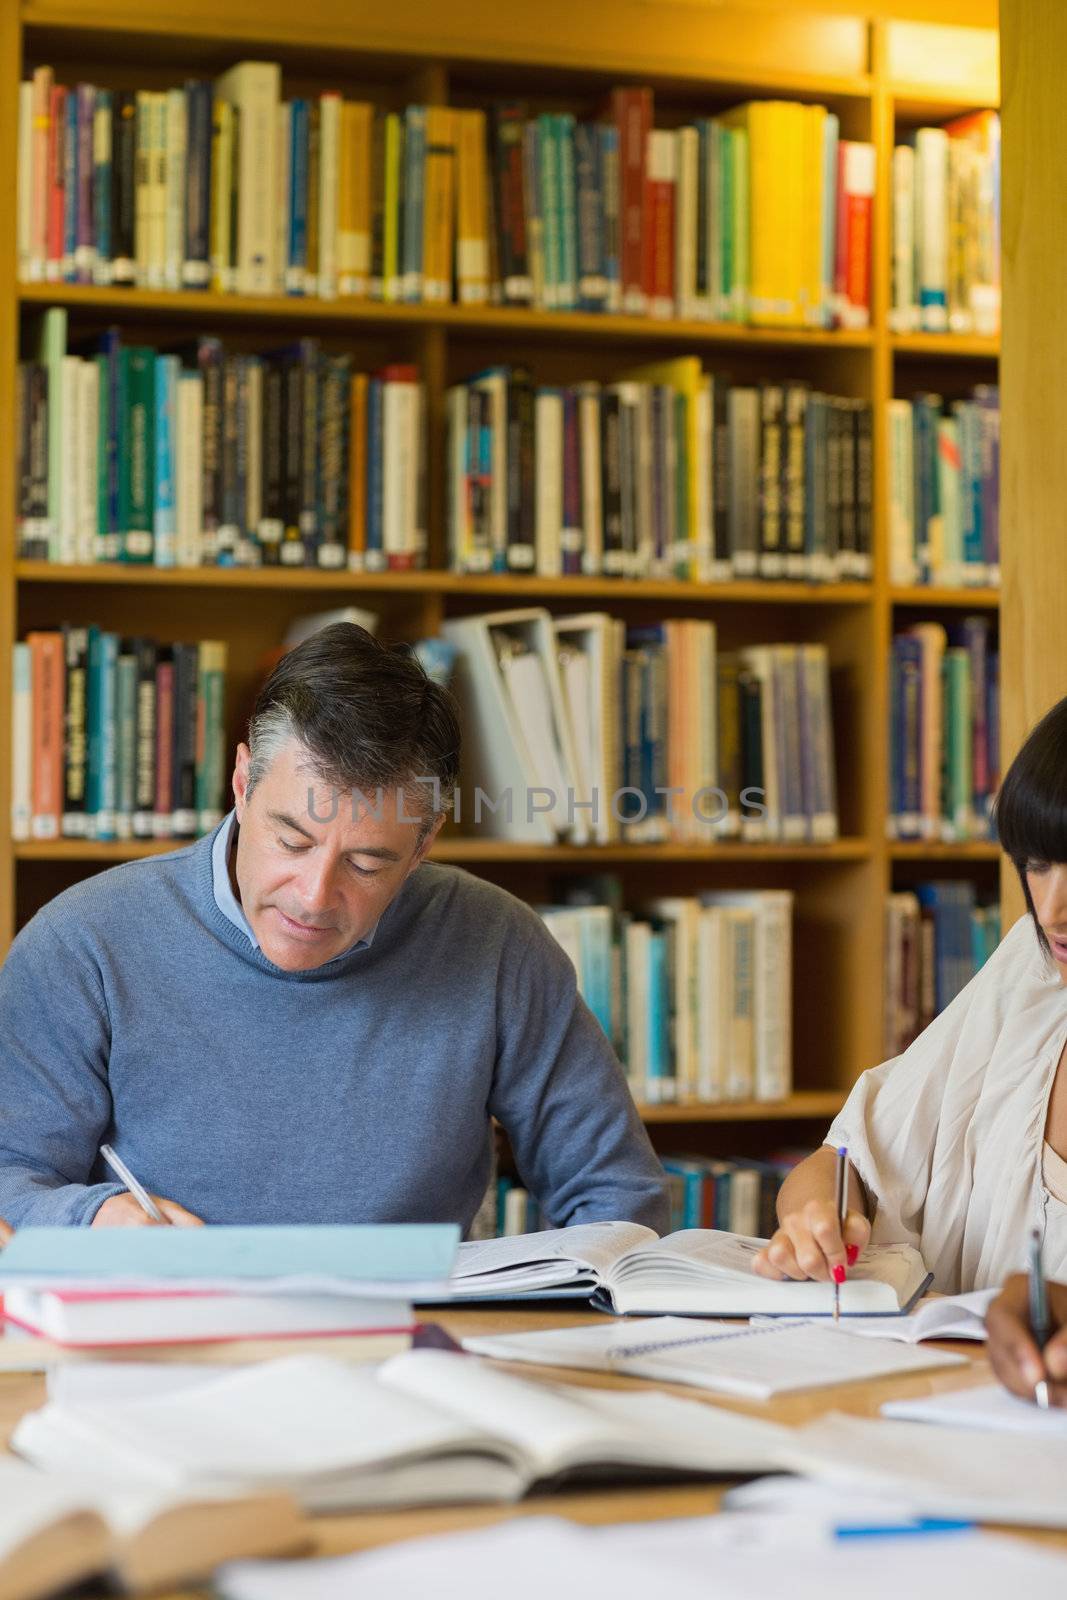 Man studying in library with others